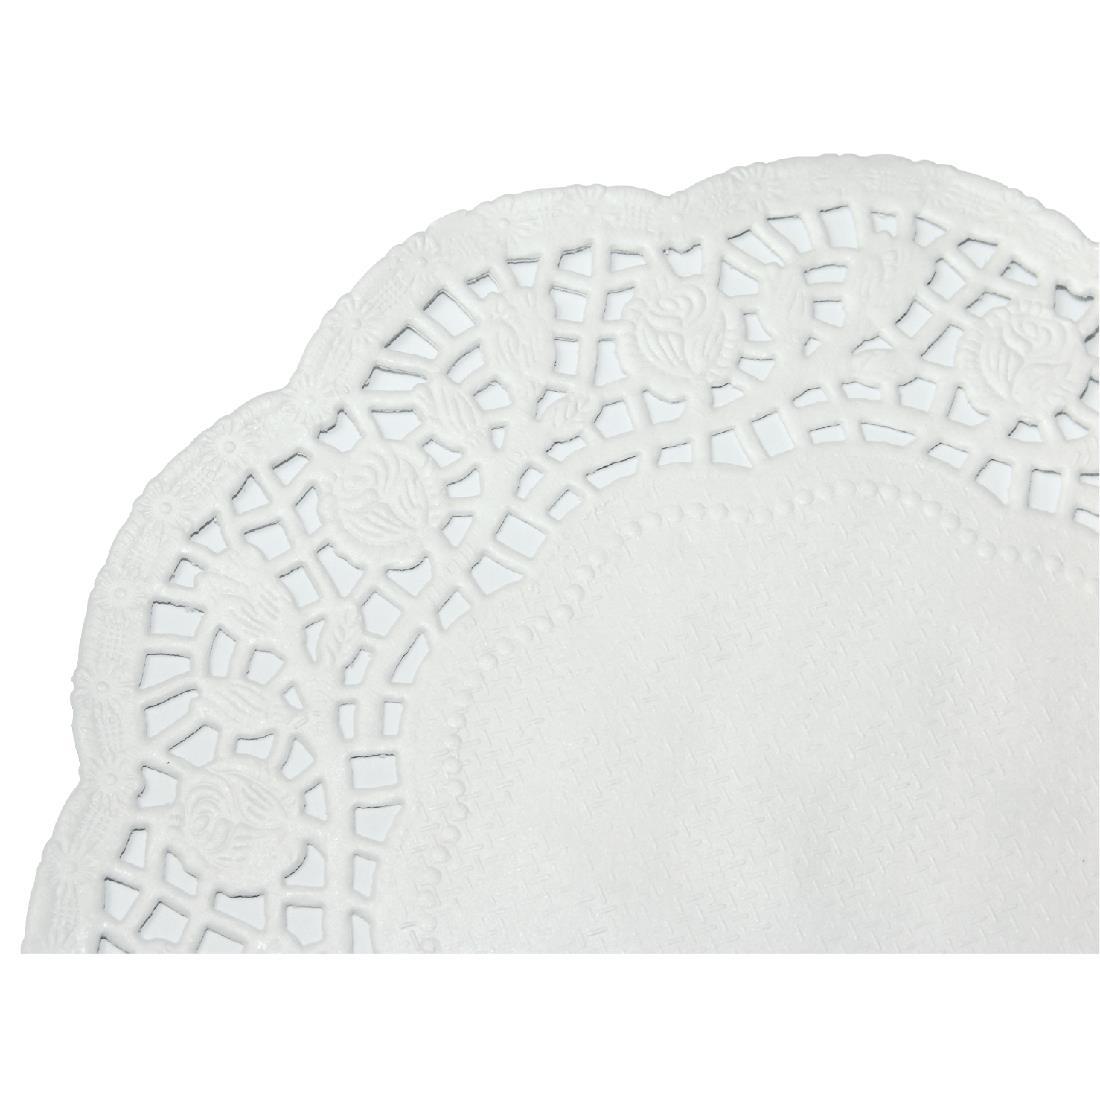 Fiesta Round Paper Doilies 165mm (Pack of 250) - CE991  - 3